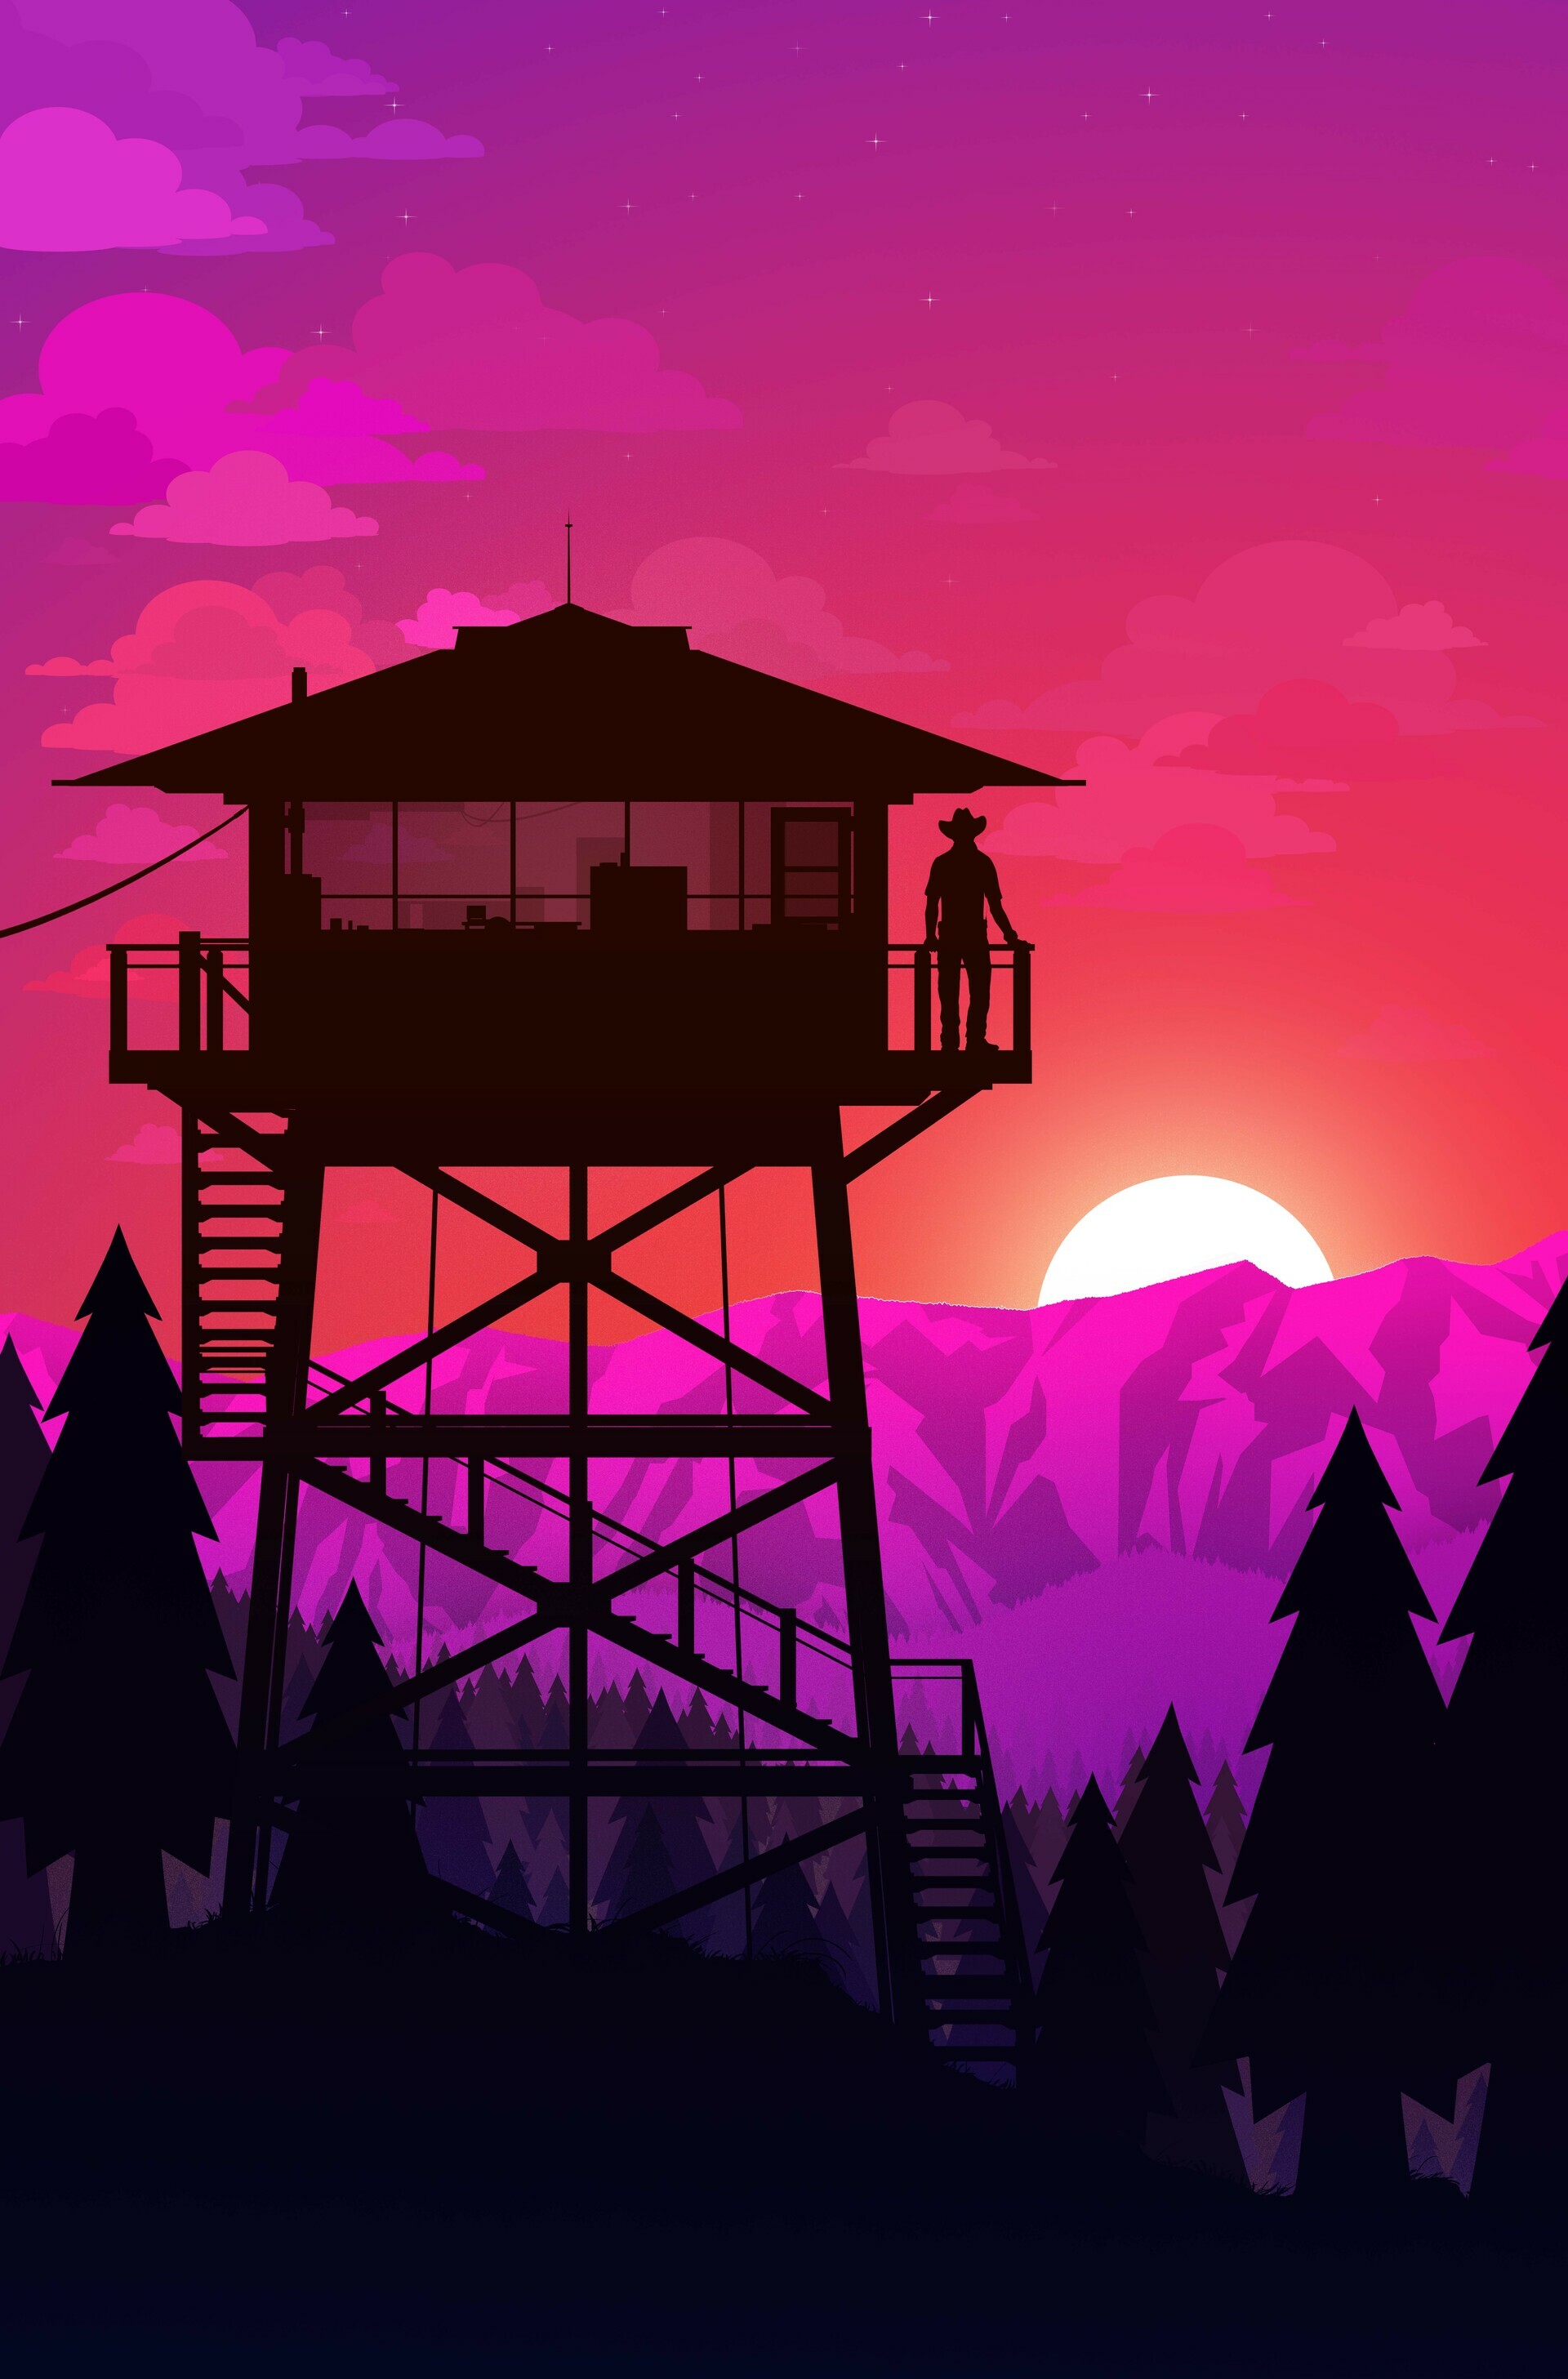 Firewatch: An adventure game played from a first-person view that takes place in the American state of Wyoming in 1989. 1920x2920 HD Wallpaper.